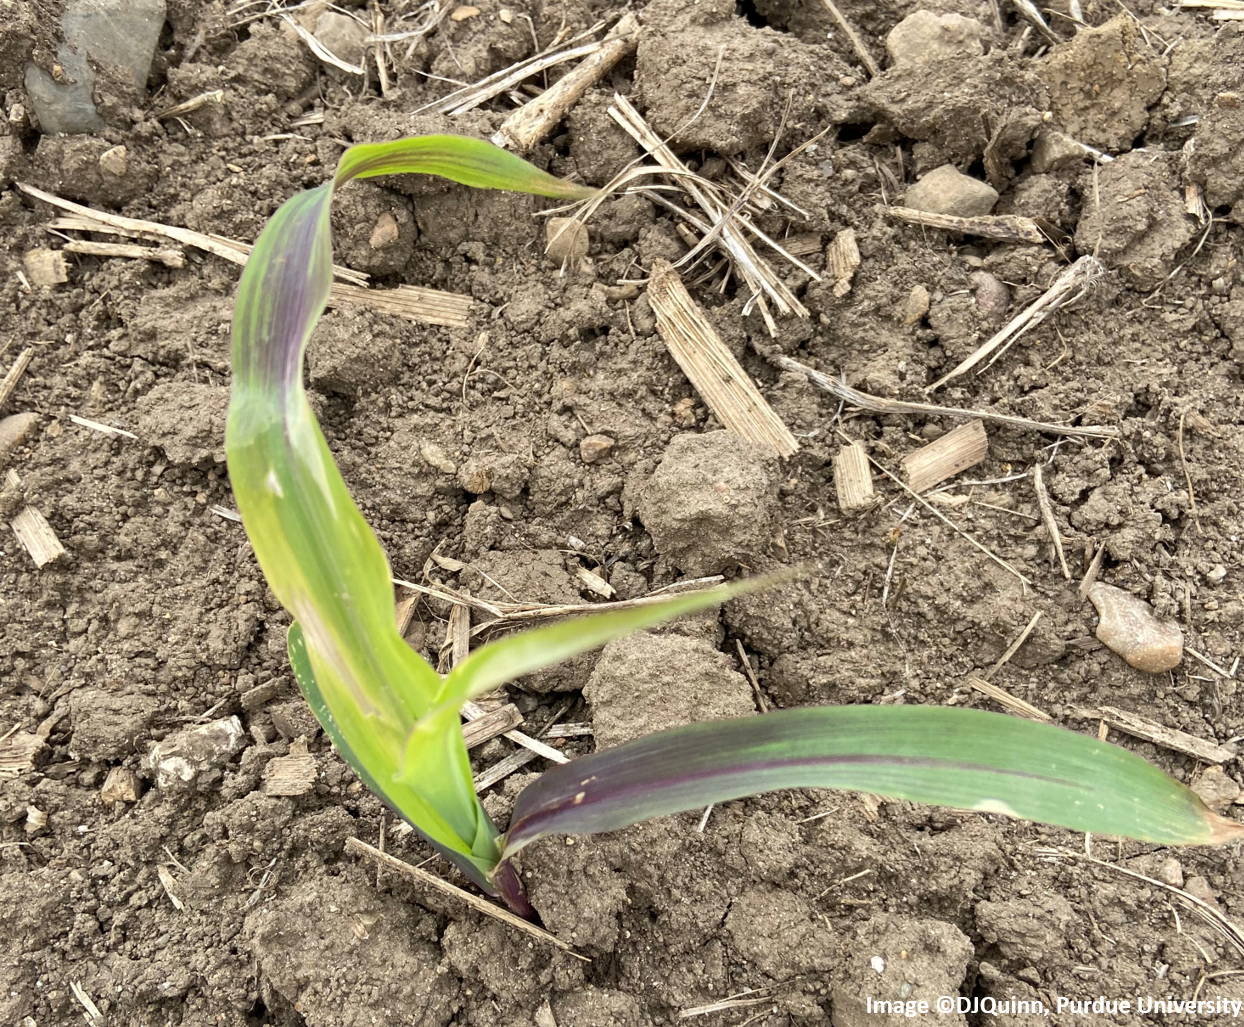 Image 1: Purple corn leaf symptoms observed on V2 corn in Northern Indiana in 2021 caused by the build up of anthocyanin in the corn leaves due to cool temperatures.